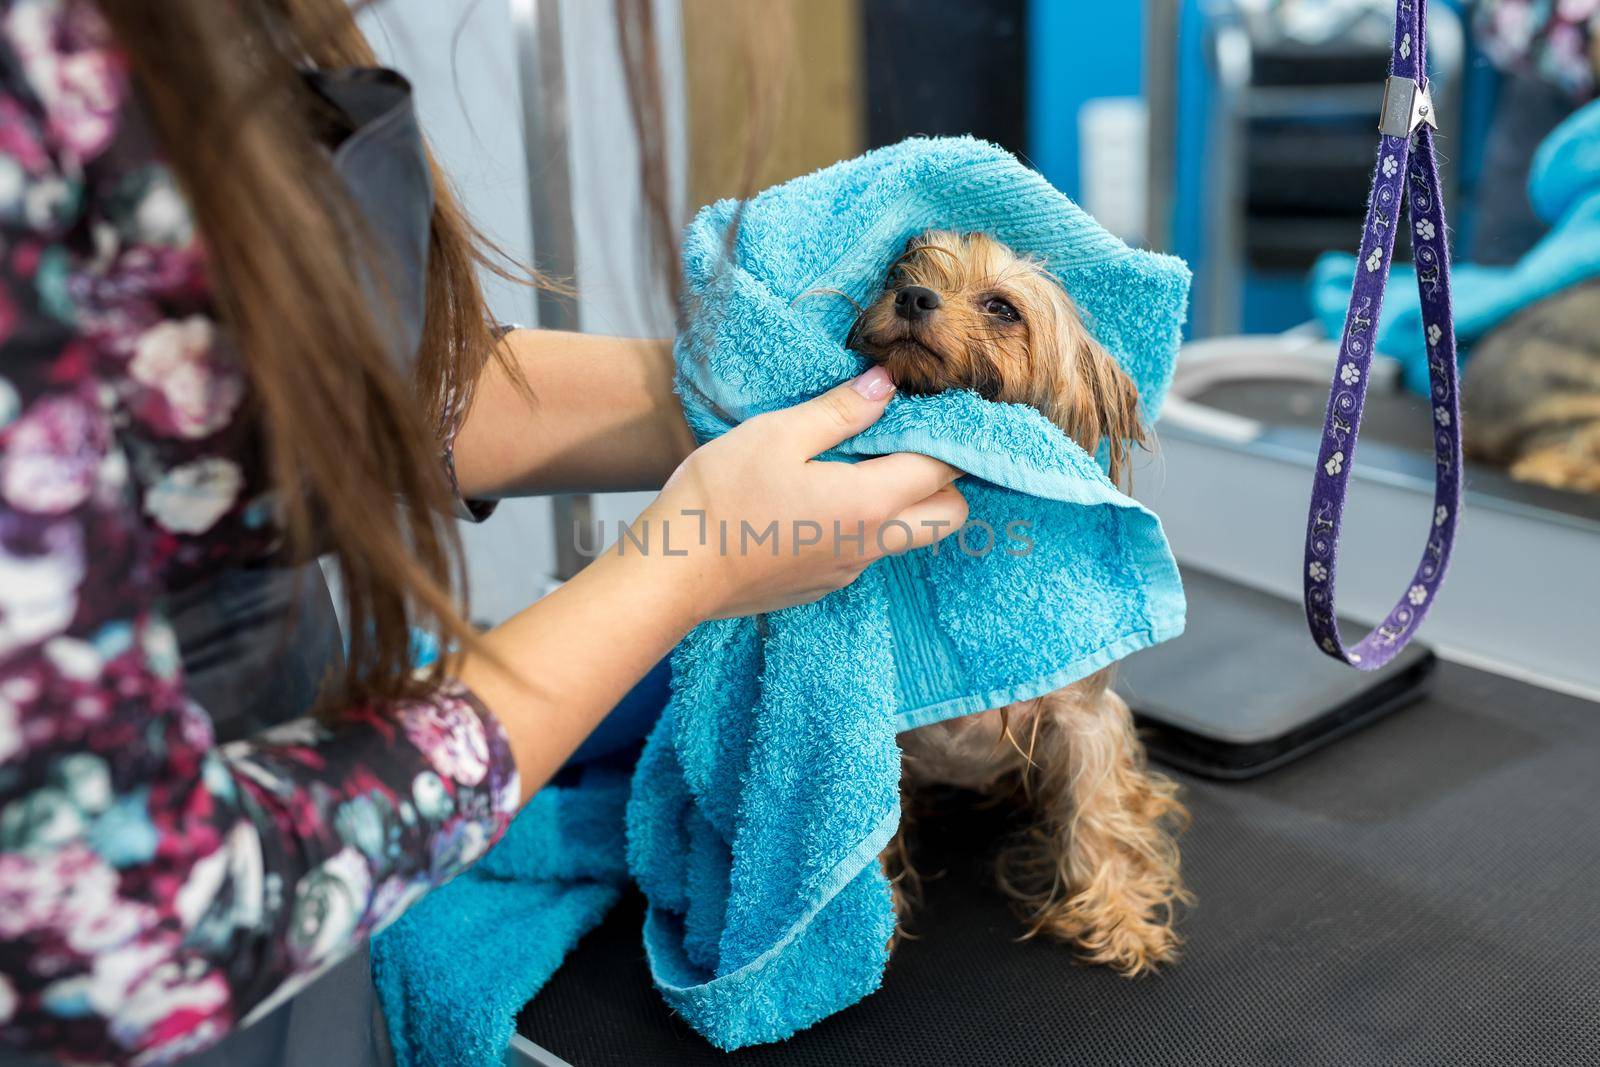 Close-up of a wet Yorkshire terrier wrapped in a blue towel on a table at a veterinary clinic. Care and care of dogs. A small dog was washed before shearing, she's cold and shivering